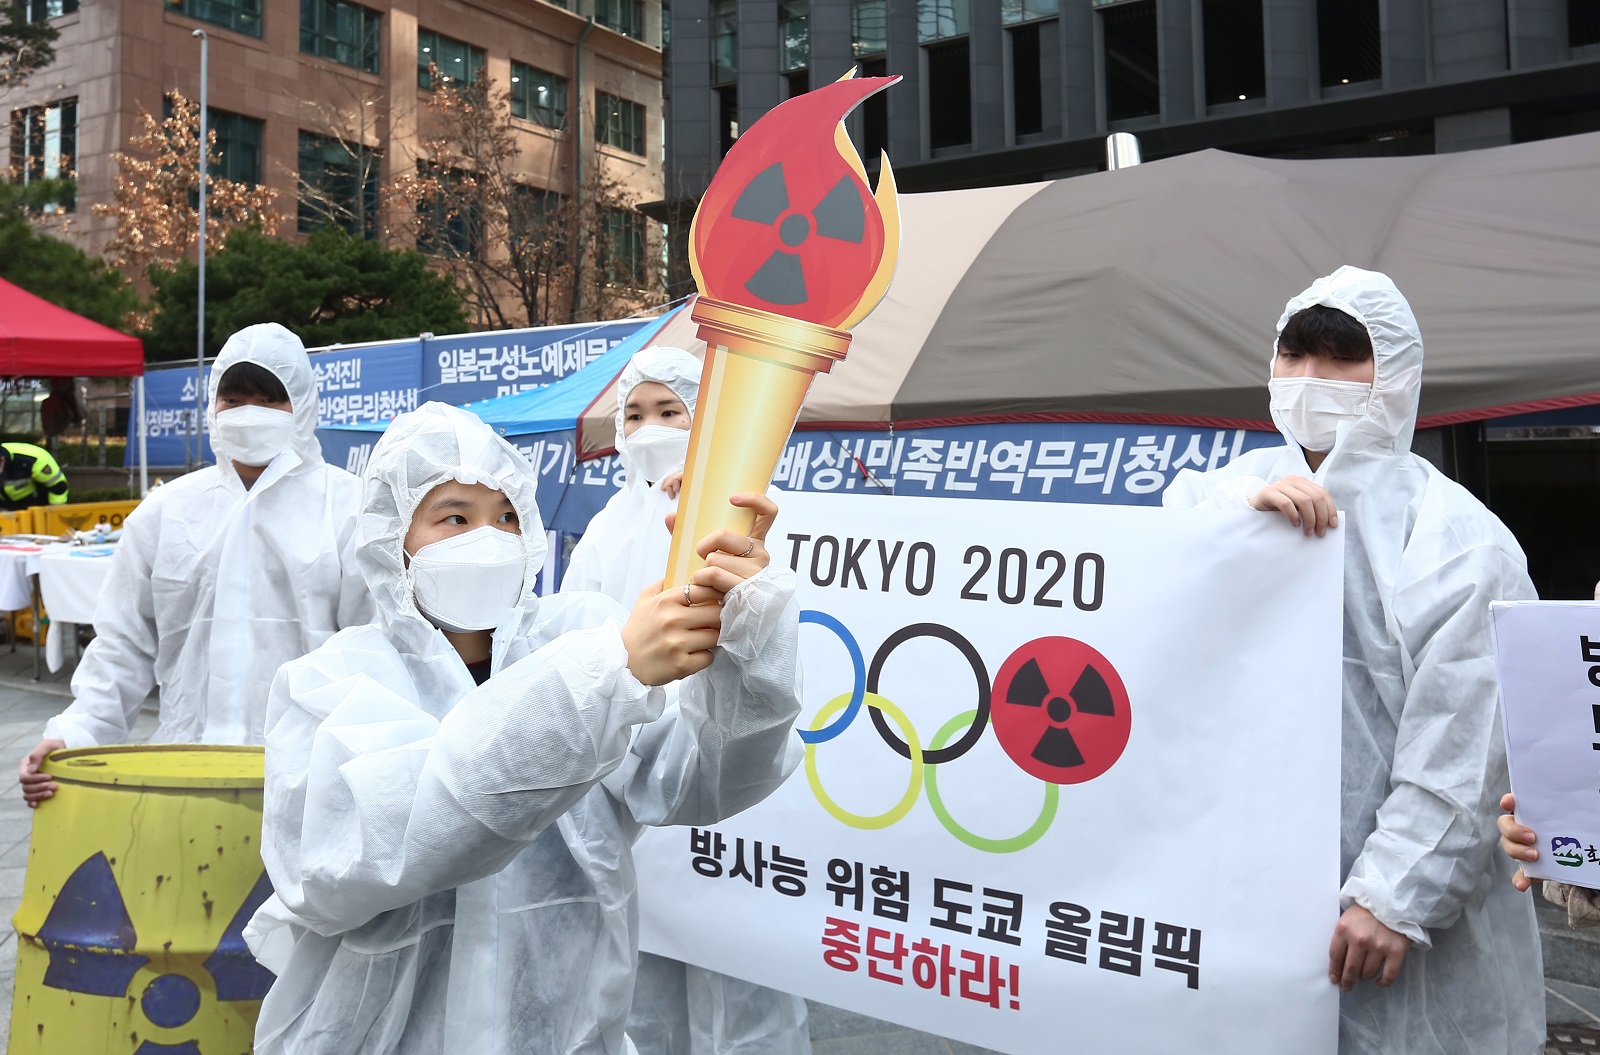 epa09095301 Members of an environmental group wearing mock hazmat suits perform during a protest against Tokyo Olympics near the Japanese embassy in Seoul, South Korea, 25 March 2021. The Summer Olympics in Tokyo is scheduled to start on 23 July and the torch relay event began on 25 March from nuclear disaster-hit Fukushima in Japan.  EPA/JEON HEON-KYUN